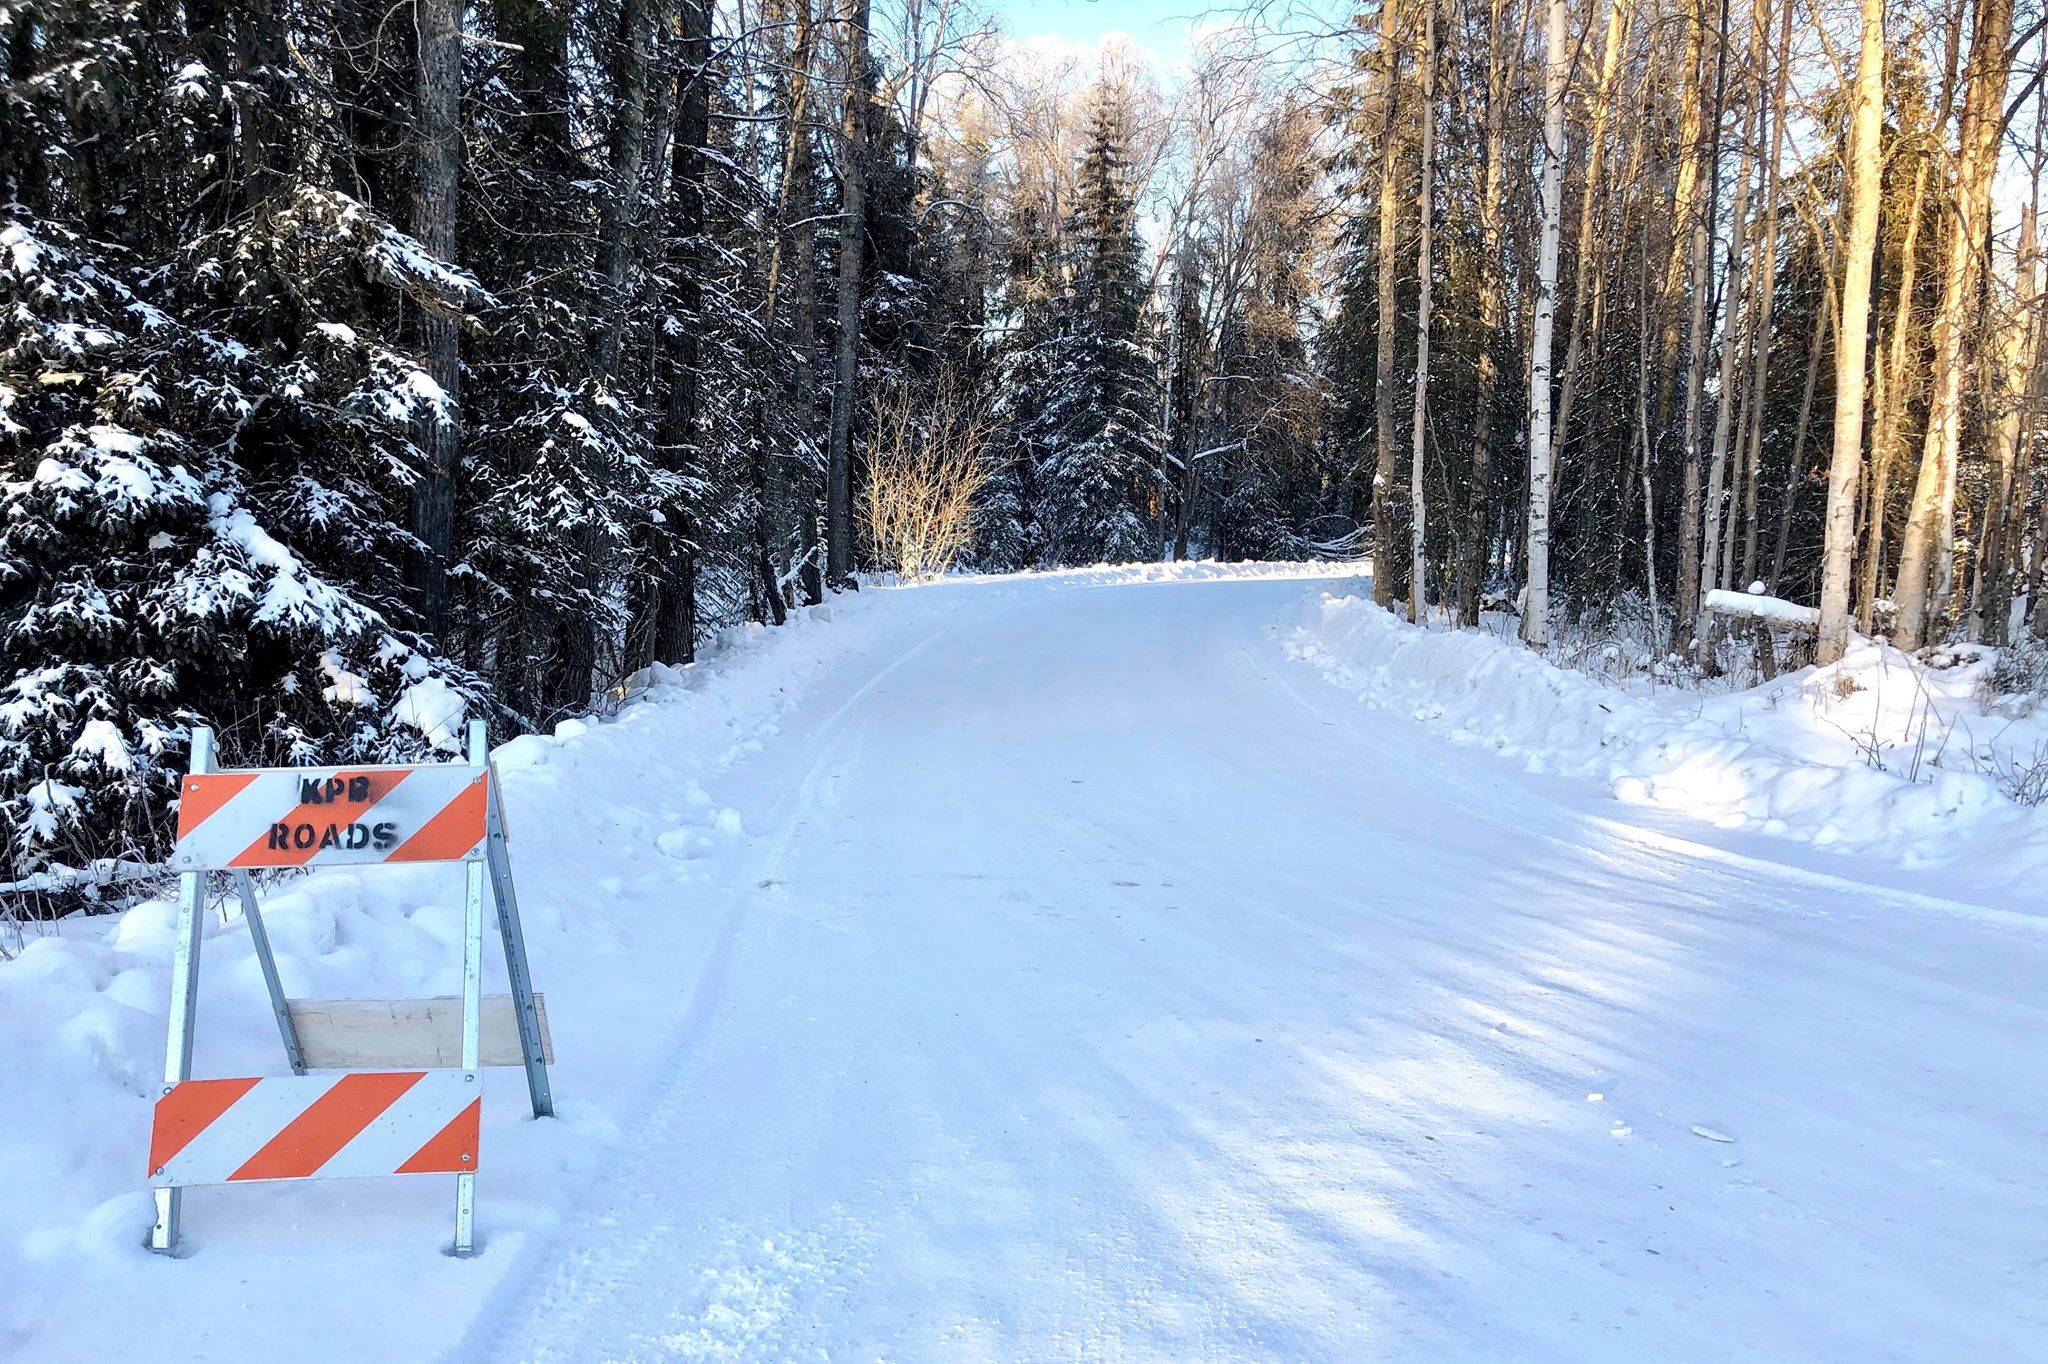 A Kenai Peninsula Borough barricade sits near Eddy Lane off of Big Eddy Road to keep traffic from traveling over flooded areas, Tuesday, Jan. 7, 2020, near Soldotna, Alaska. (Photo by Victoria Petersen/Peninsula Clarion)